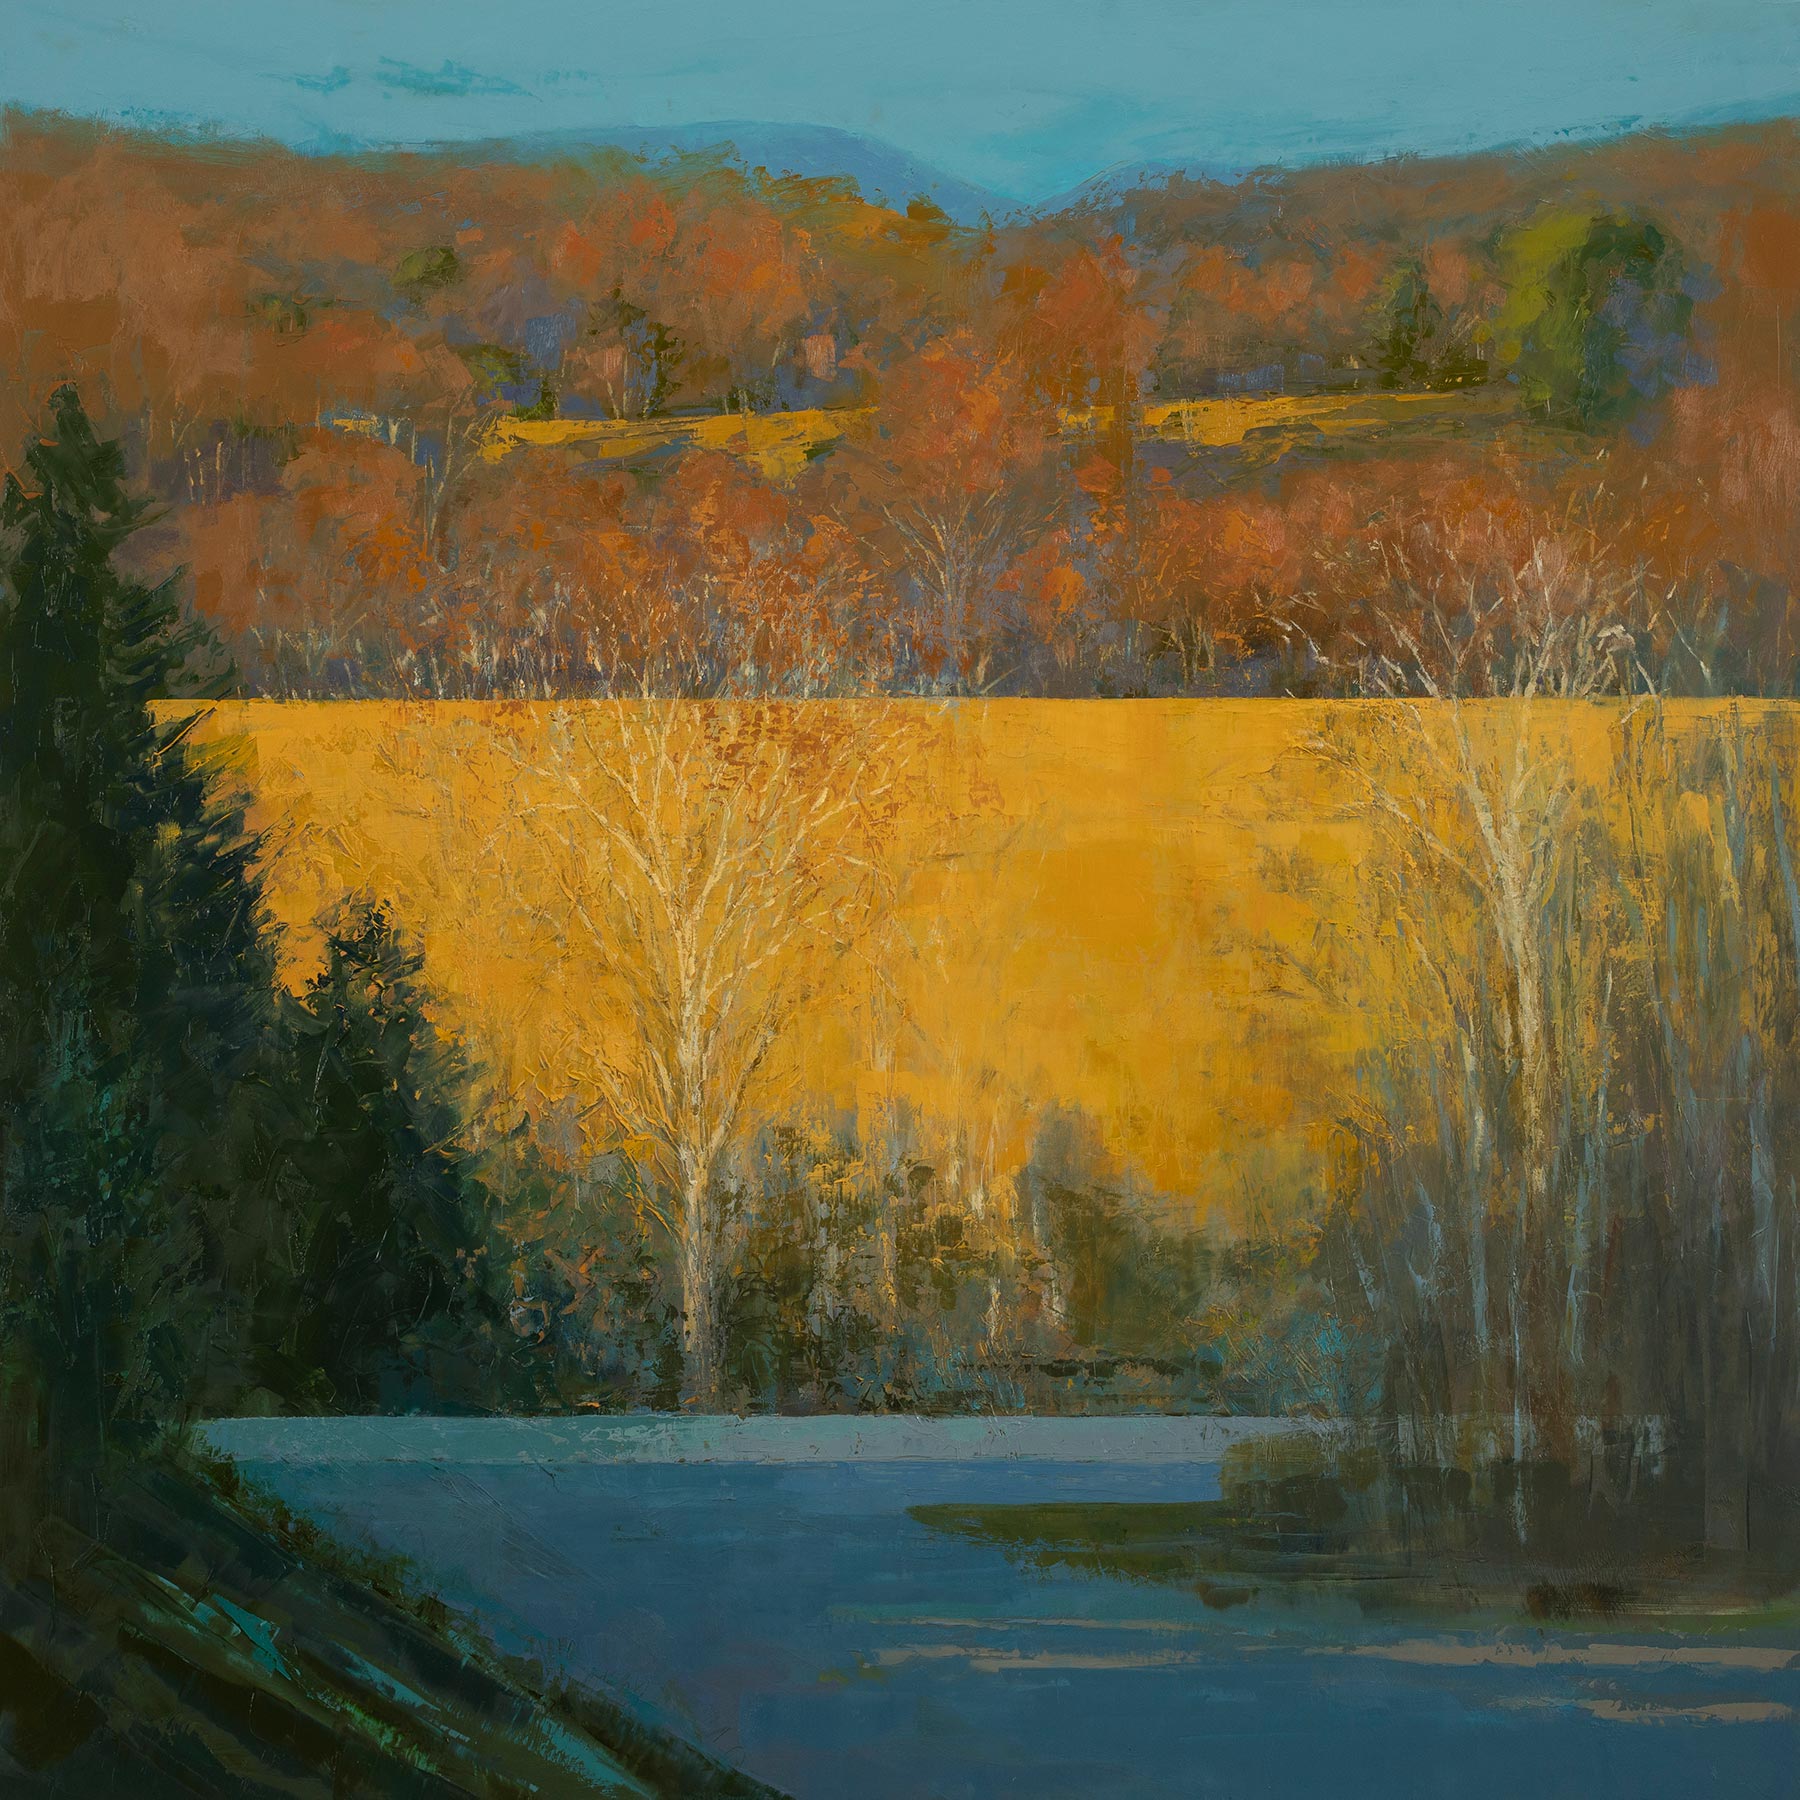 View from the Ridge: Ochre Stillness, oil on panel, 30 x 30 inches, 2020, SOLD